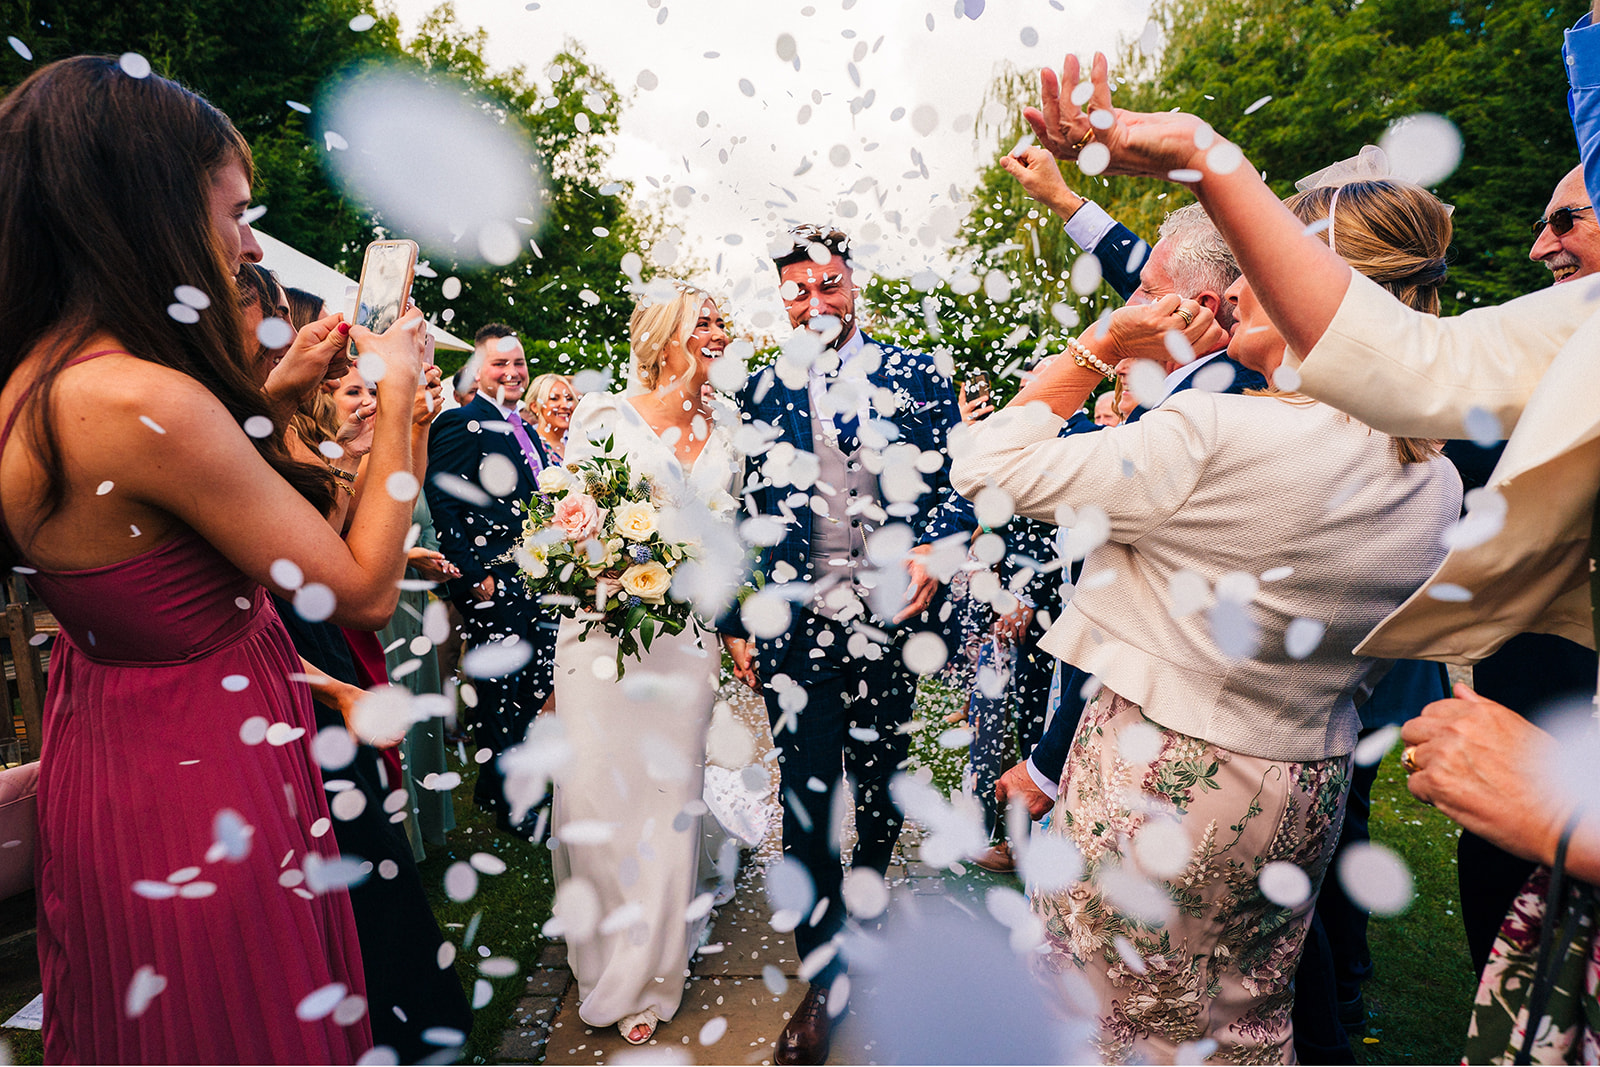 The Chequers Inn Wedding Photography - bride and groom get covered in confetti